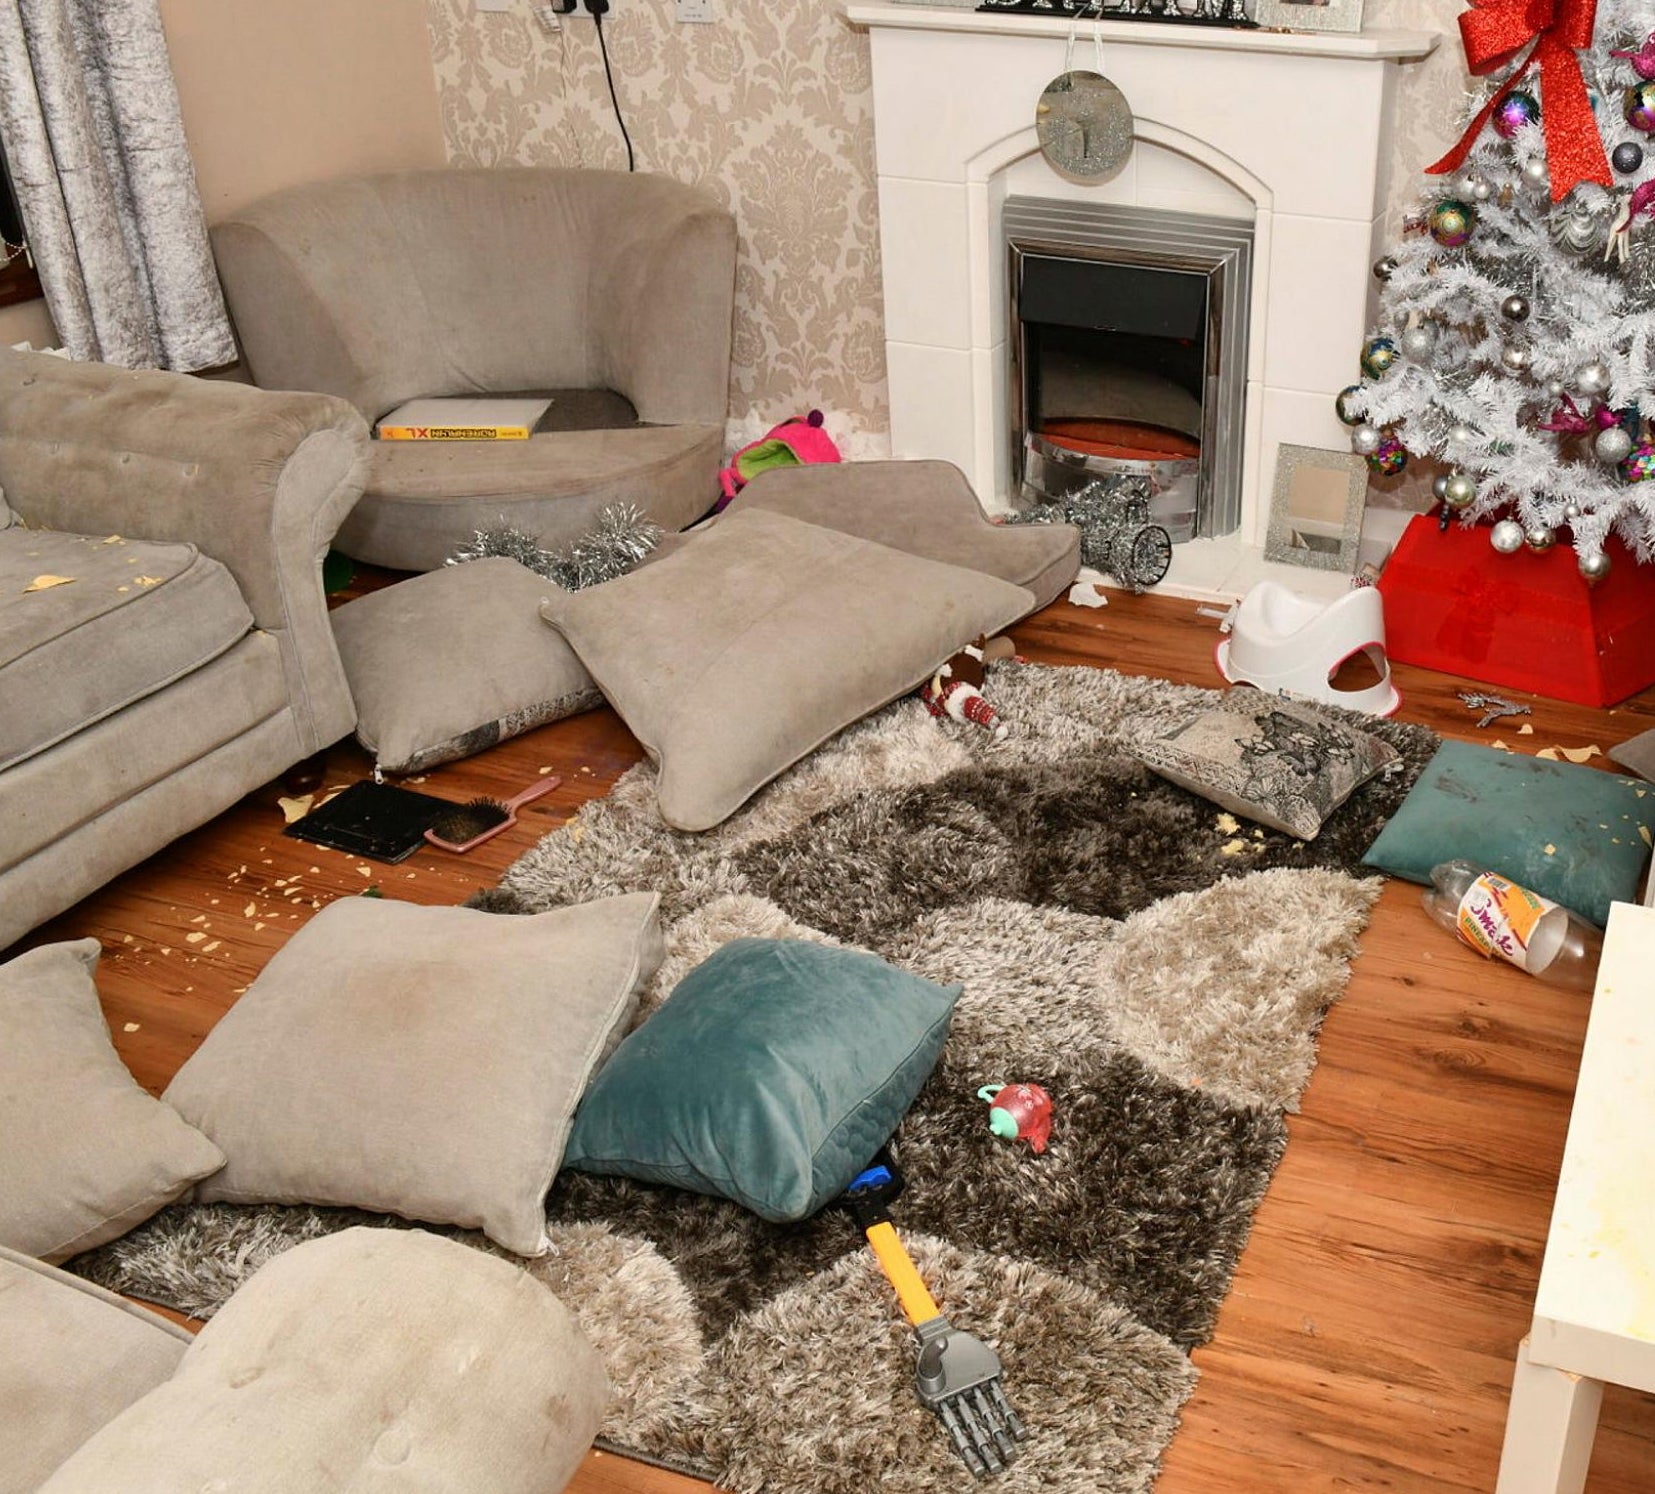 The Police Service of Northern Ireland pictures inside Caoimhe Morgan's north Belfast home after her murder